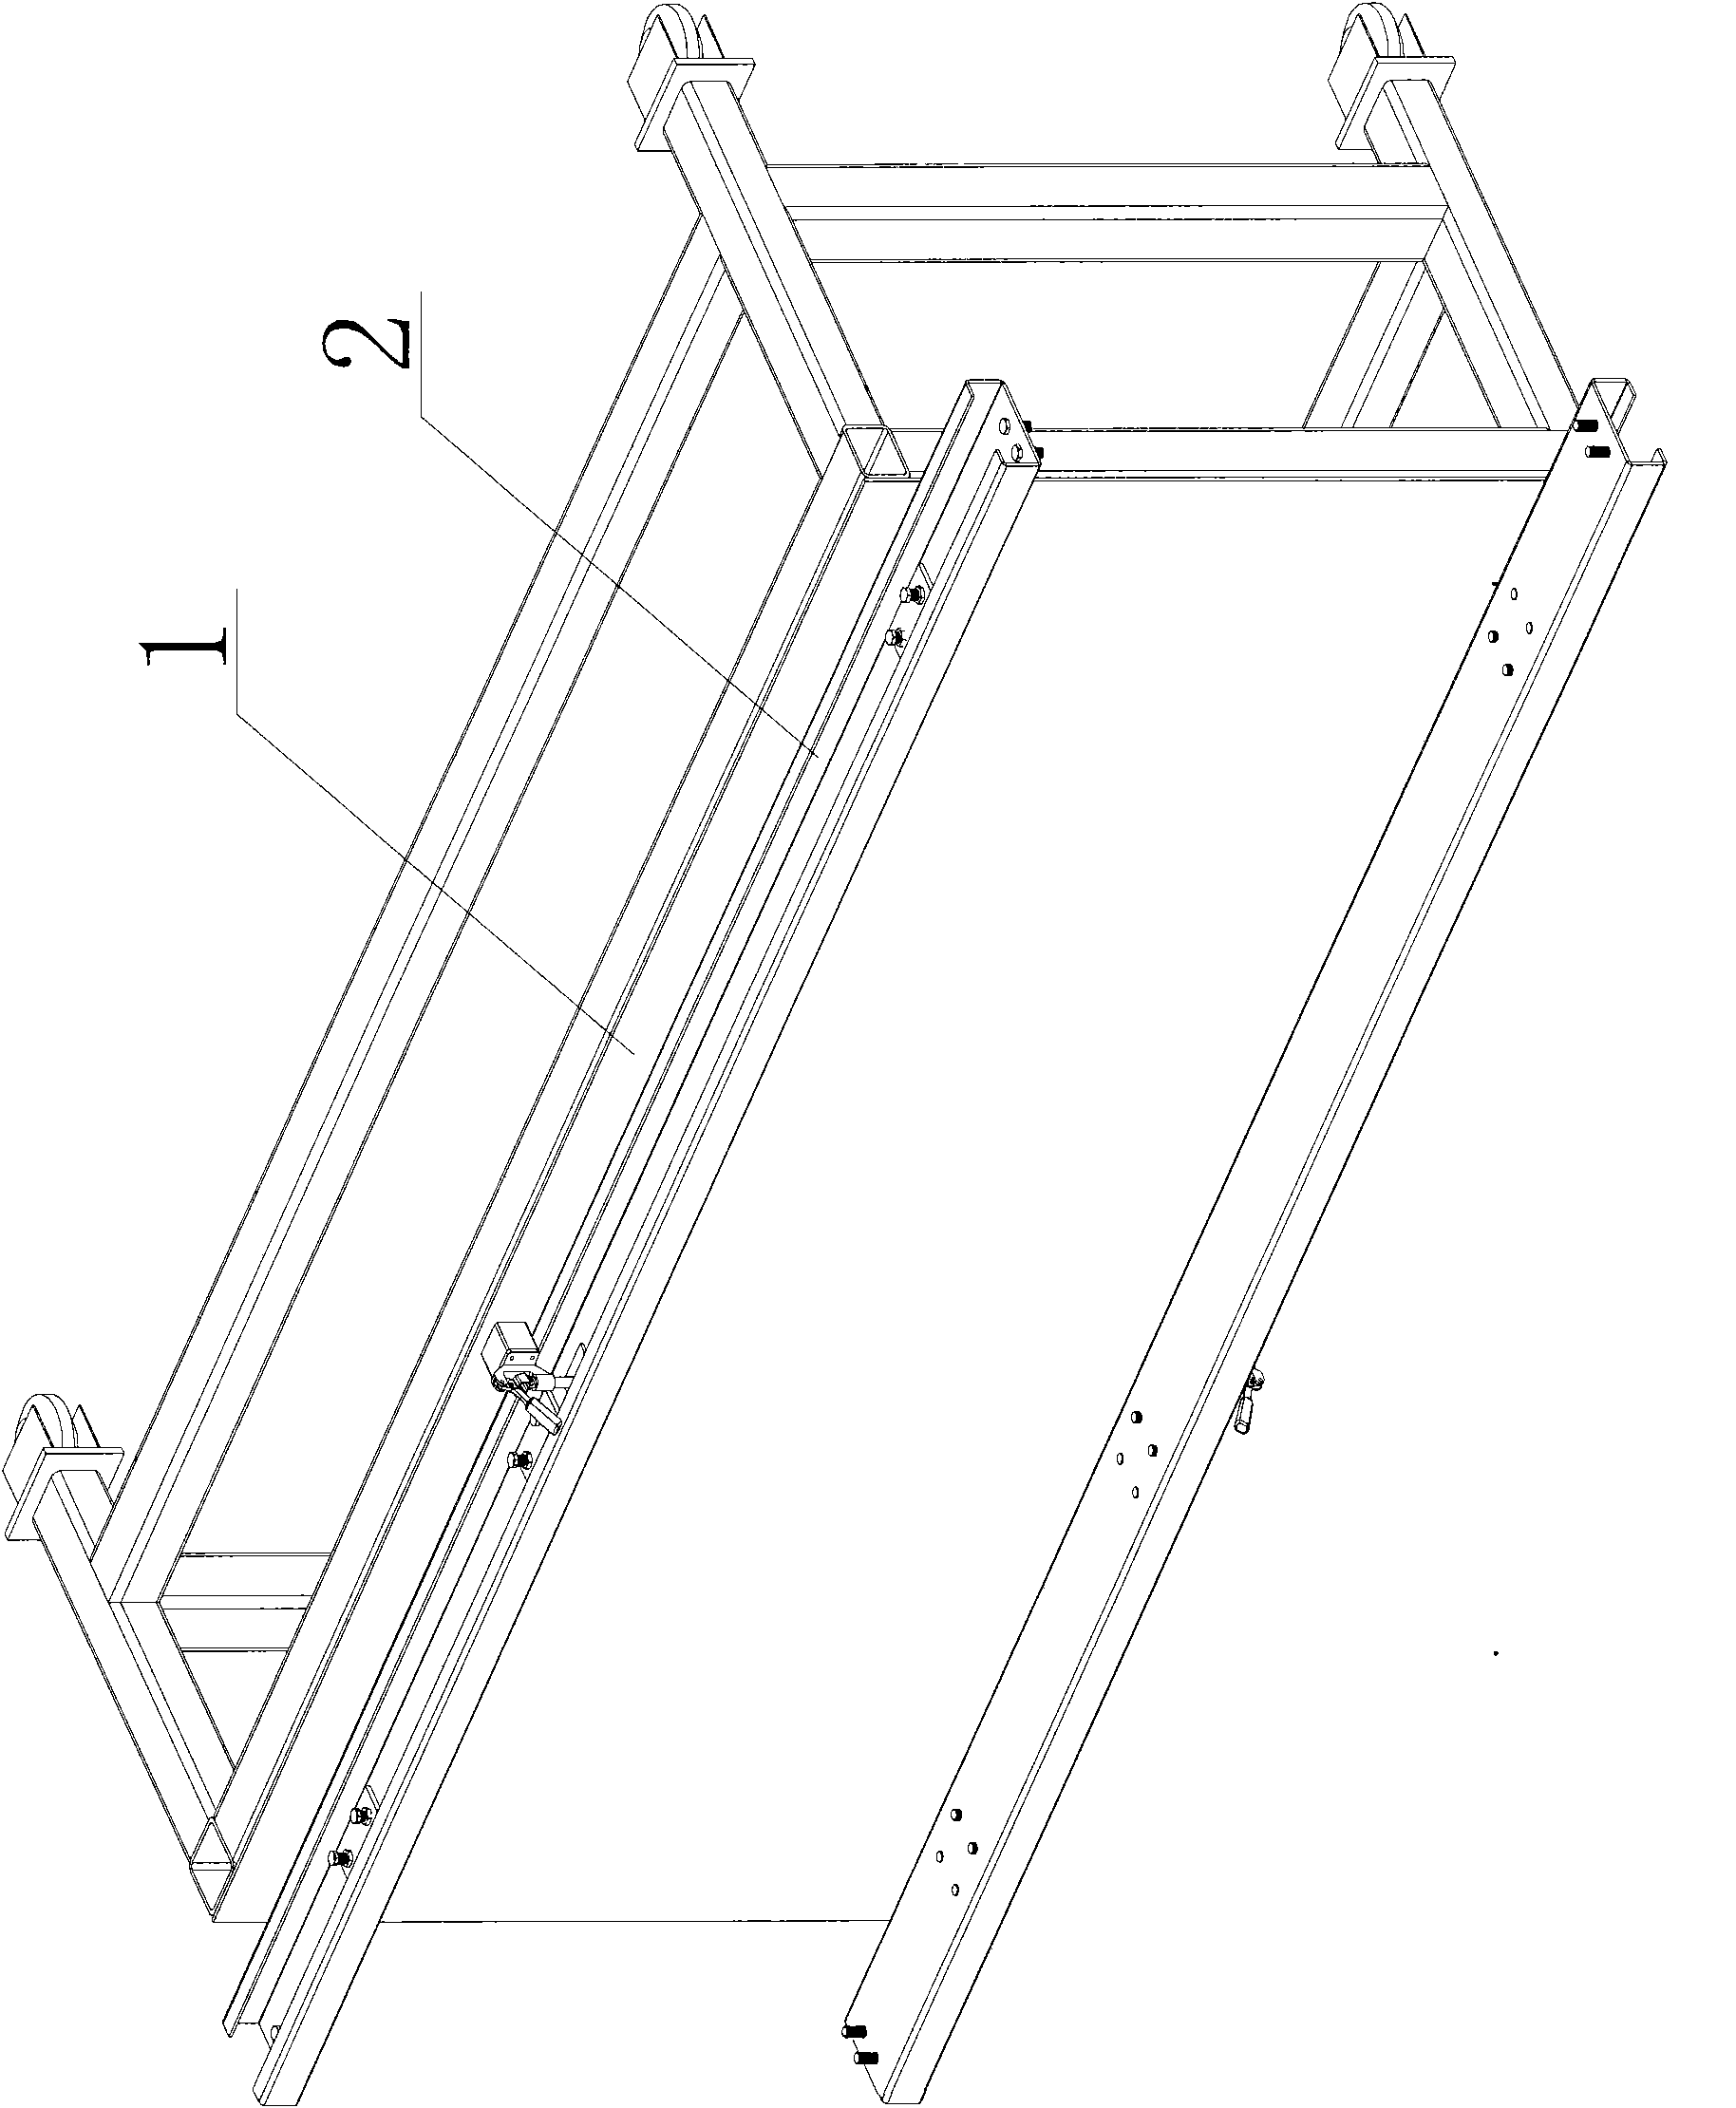 Method for assembling pedestal of overhead cell support of hybrid vehicle and clamp thereof